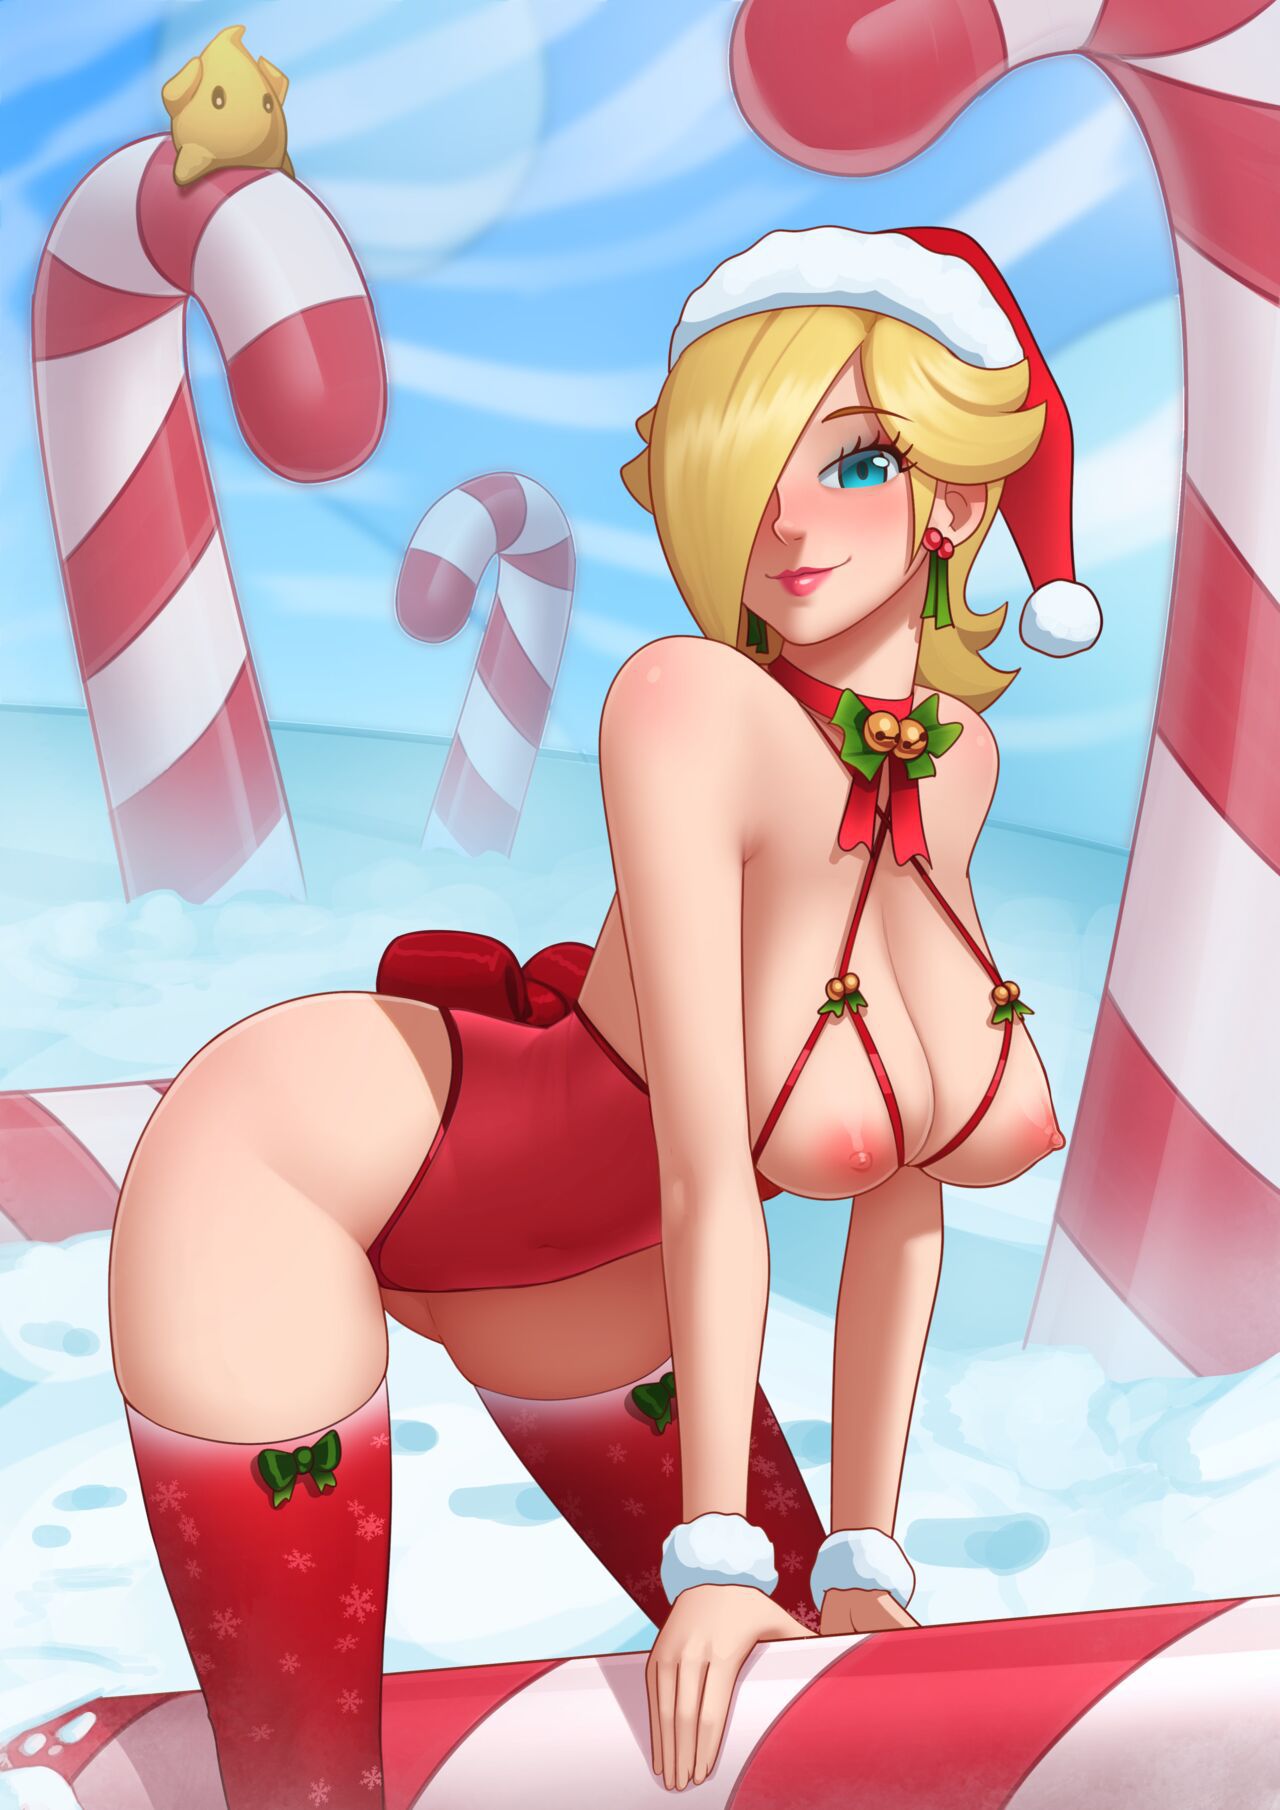 [Deilan12] Candy Canes Appeared 13